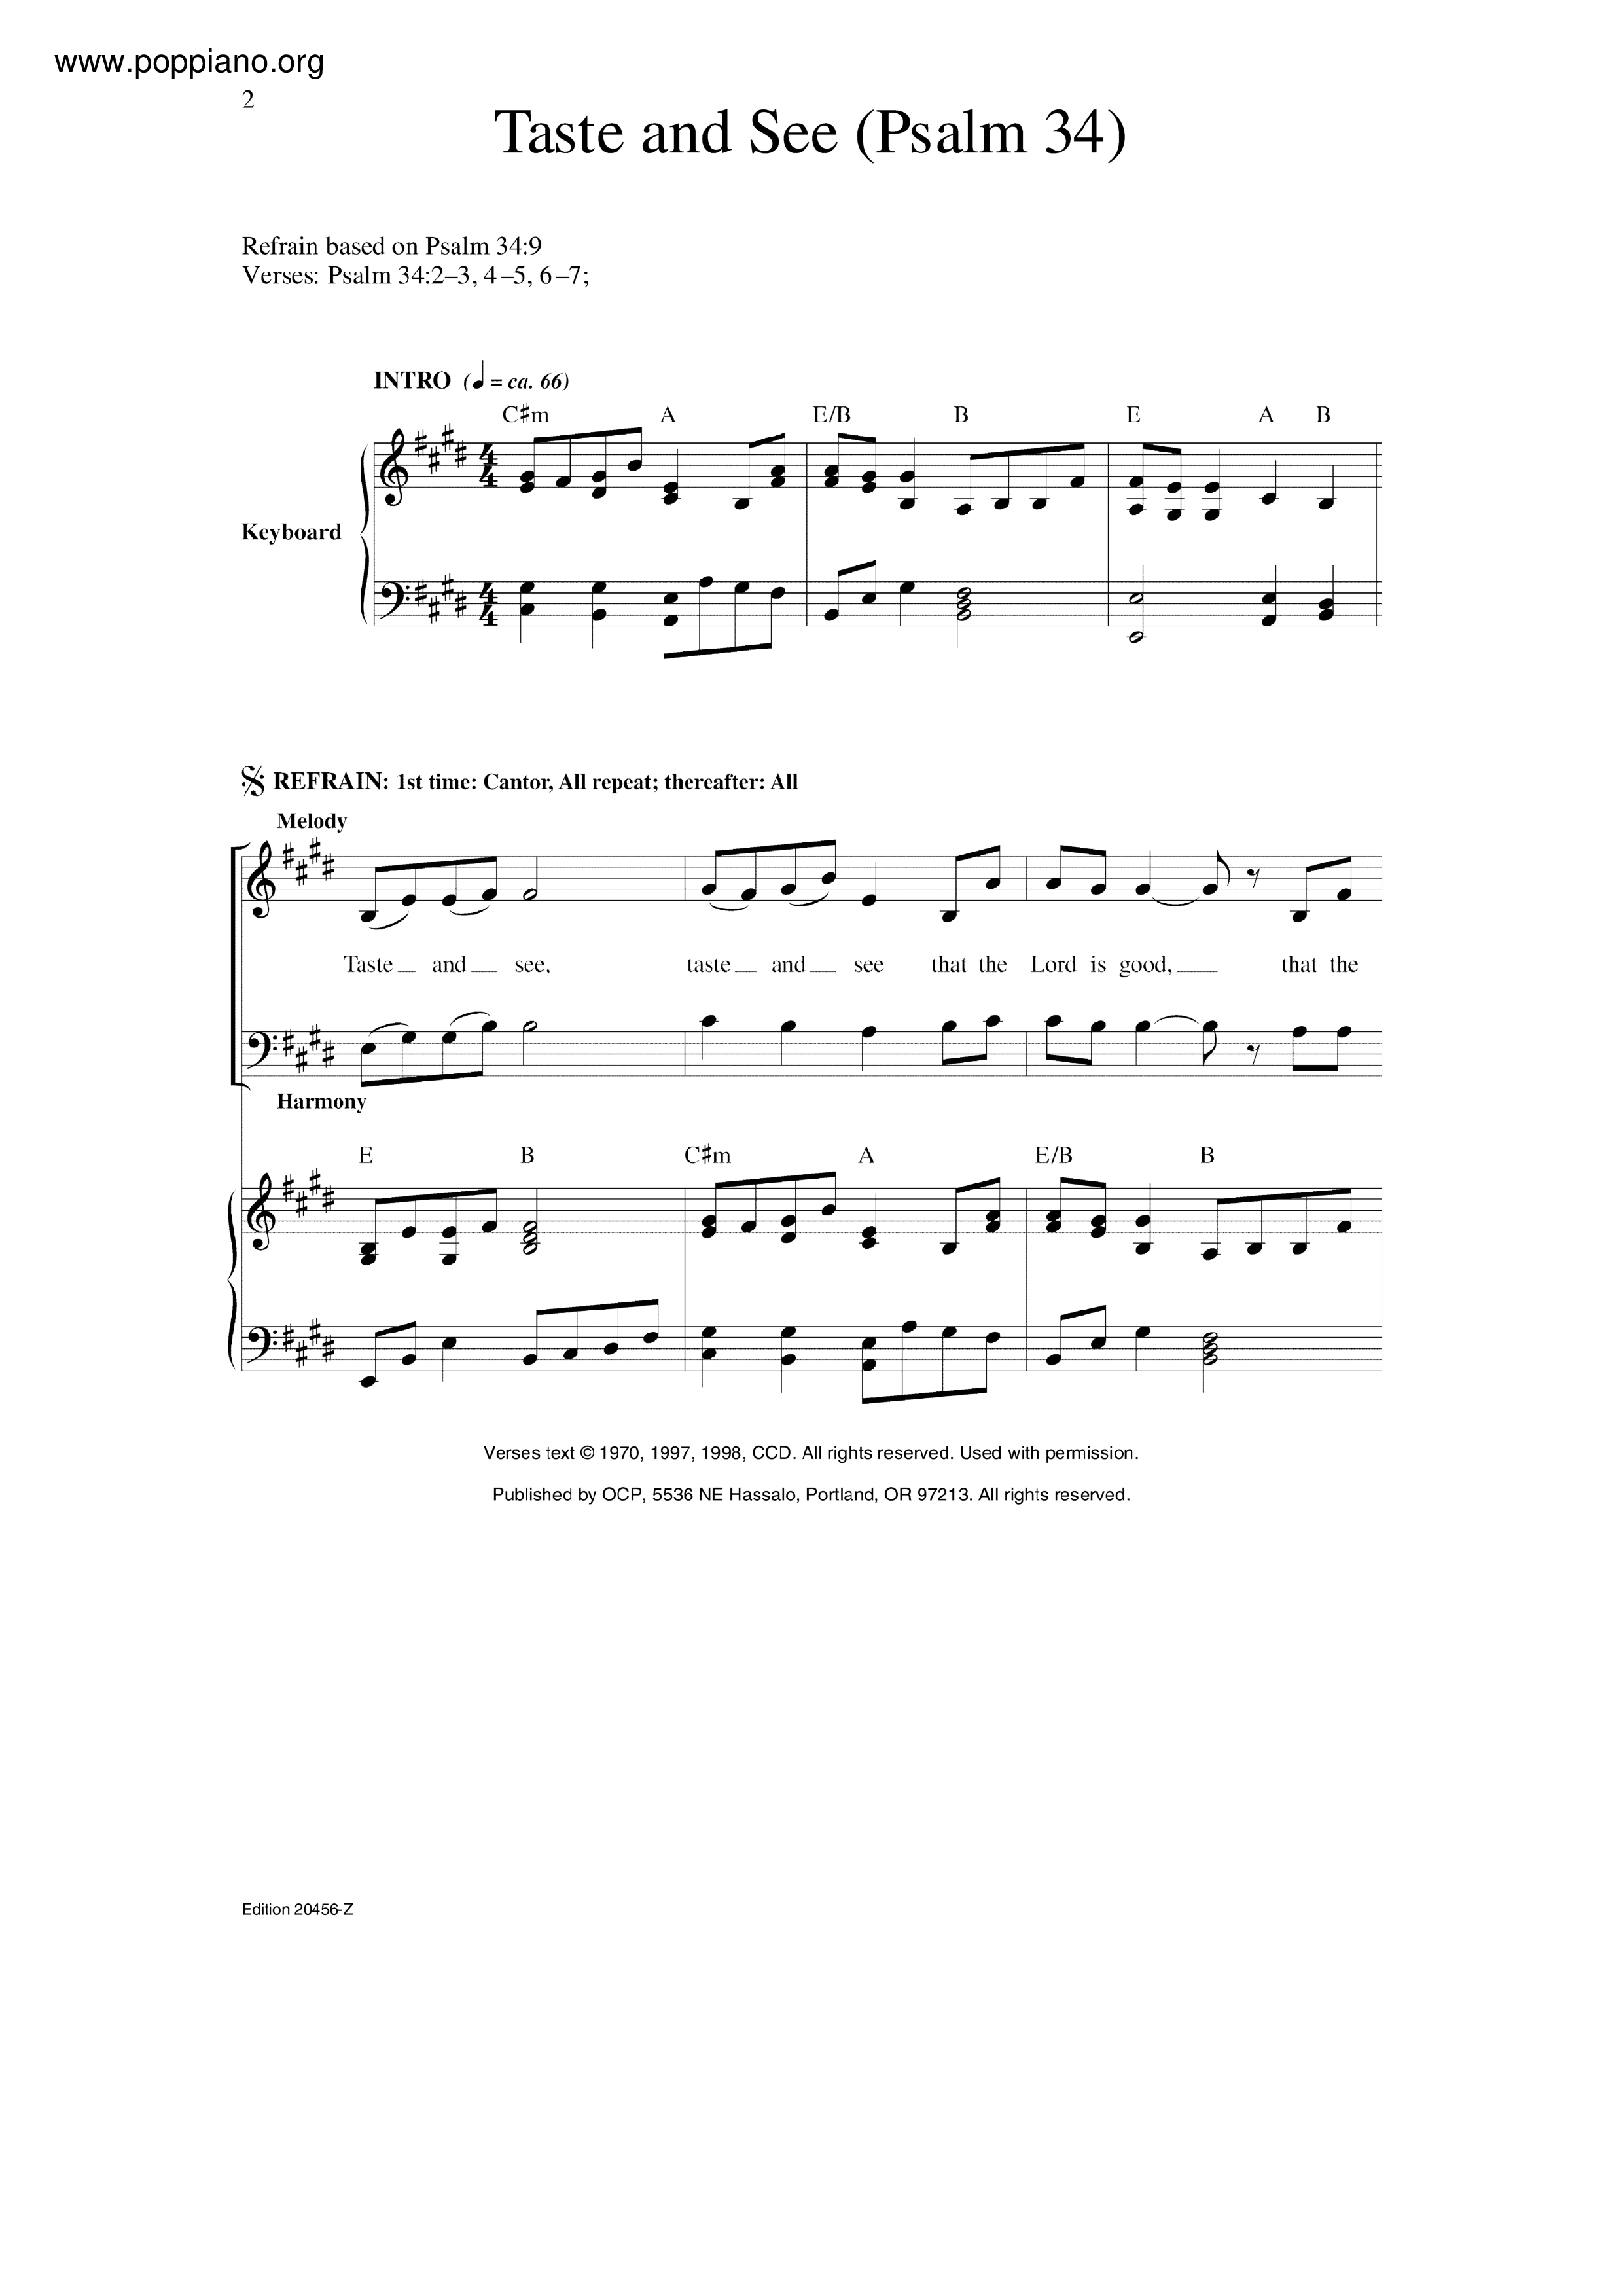 taste-and-see-psalm-34-sheet-music-piano-score-free-pdf-download